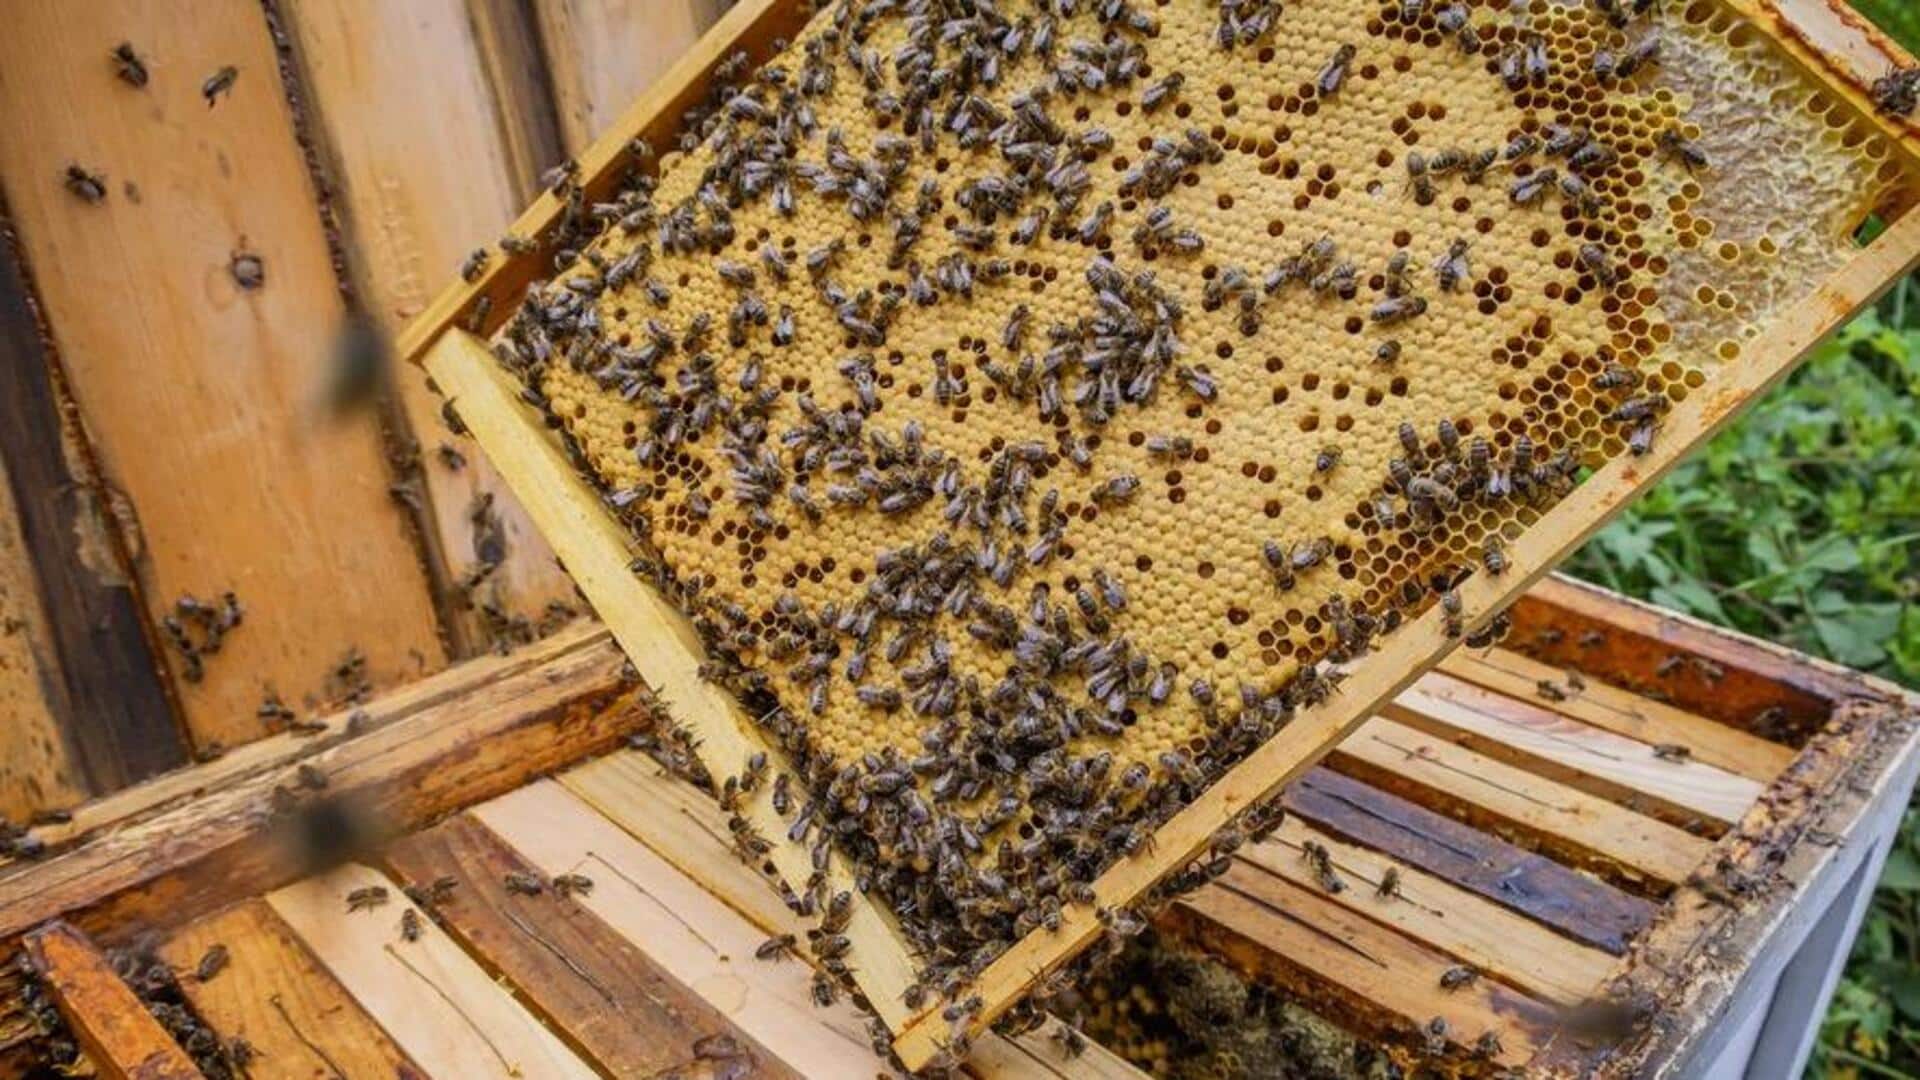 Expert reveals how beekeeping positively impacts our environment